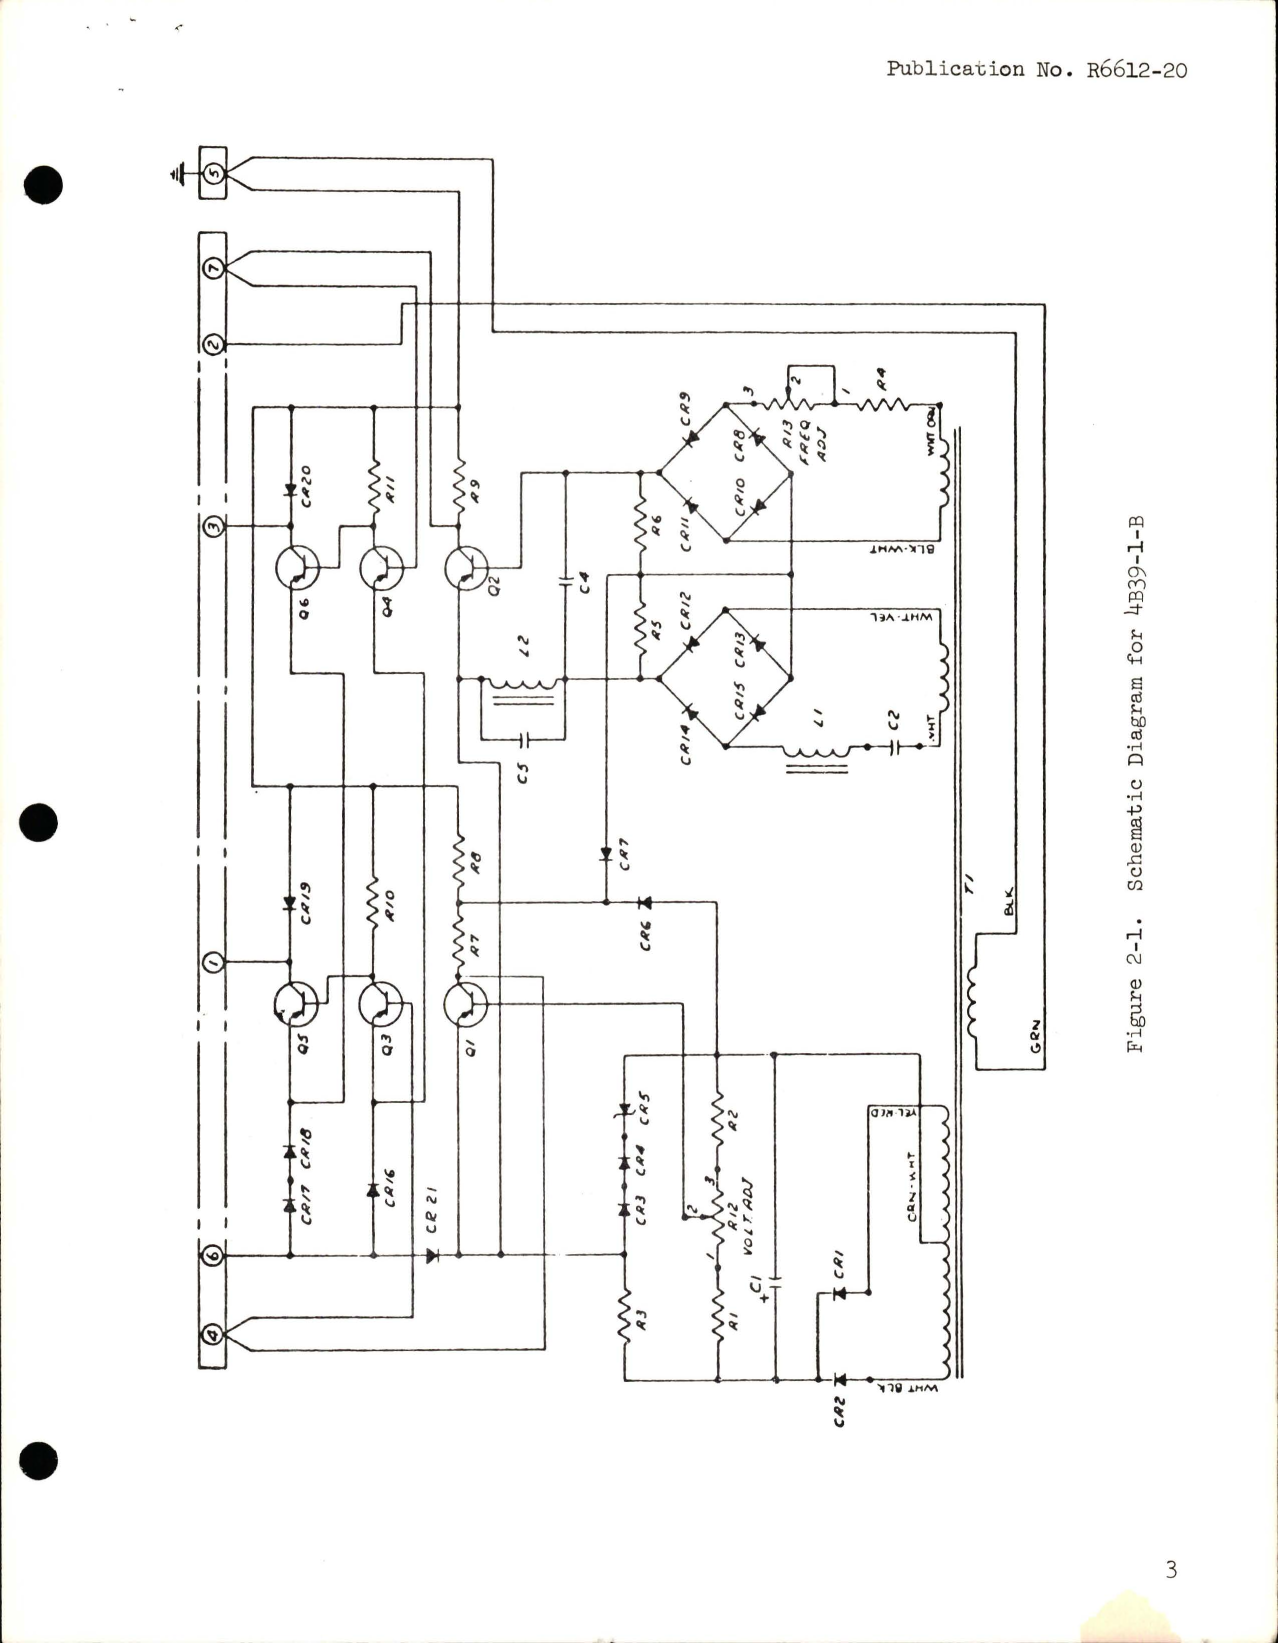 Sample page 9 from AirCorps Library document: Overhaul Instructions with Parts List for Voltage & Frequency Regulator - Types 4B39-1-B, 4B39-1-C